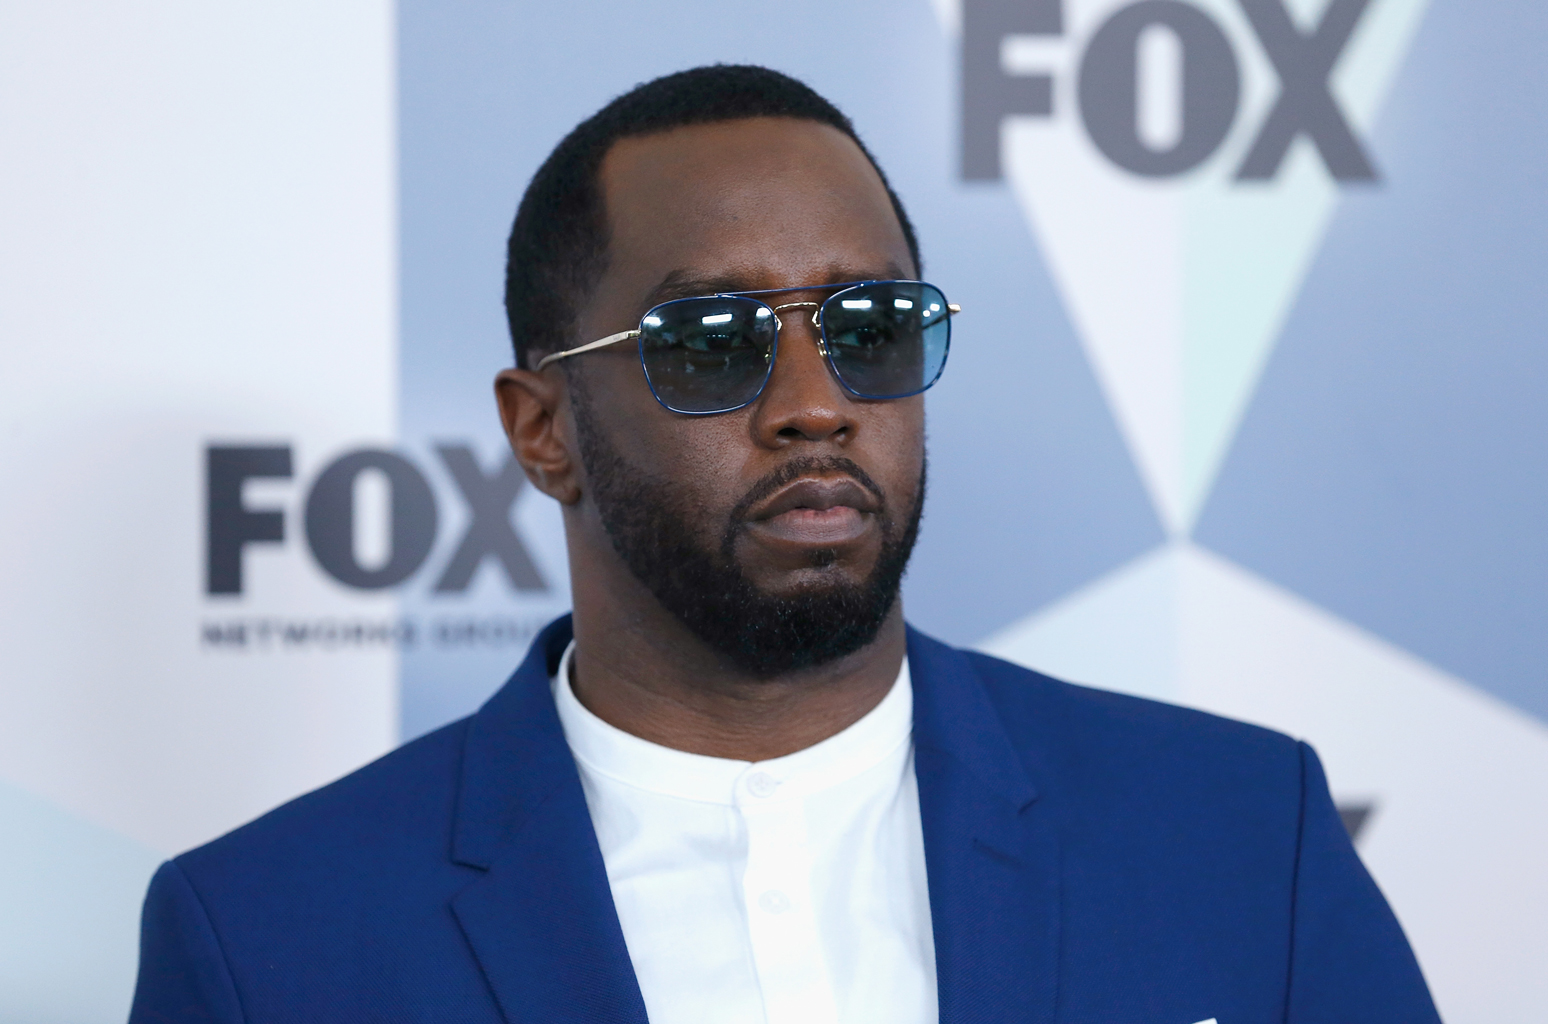 woman suing sean ‘diddy' combs in ‘gang rape' lawsuit can't remain anonymous, judge rules